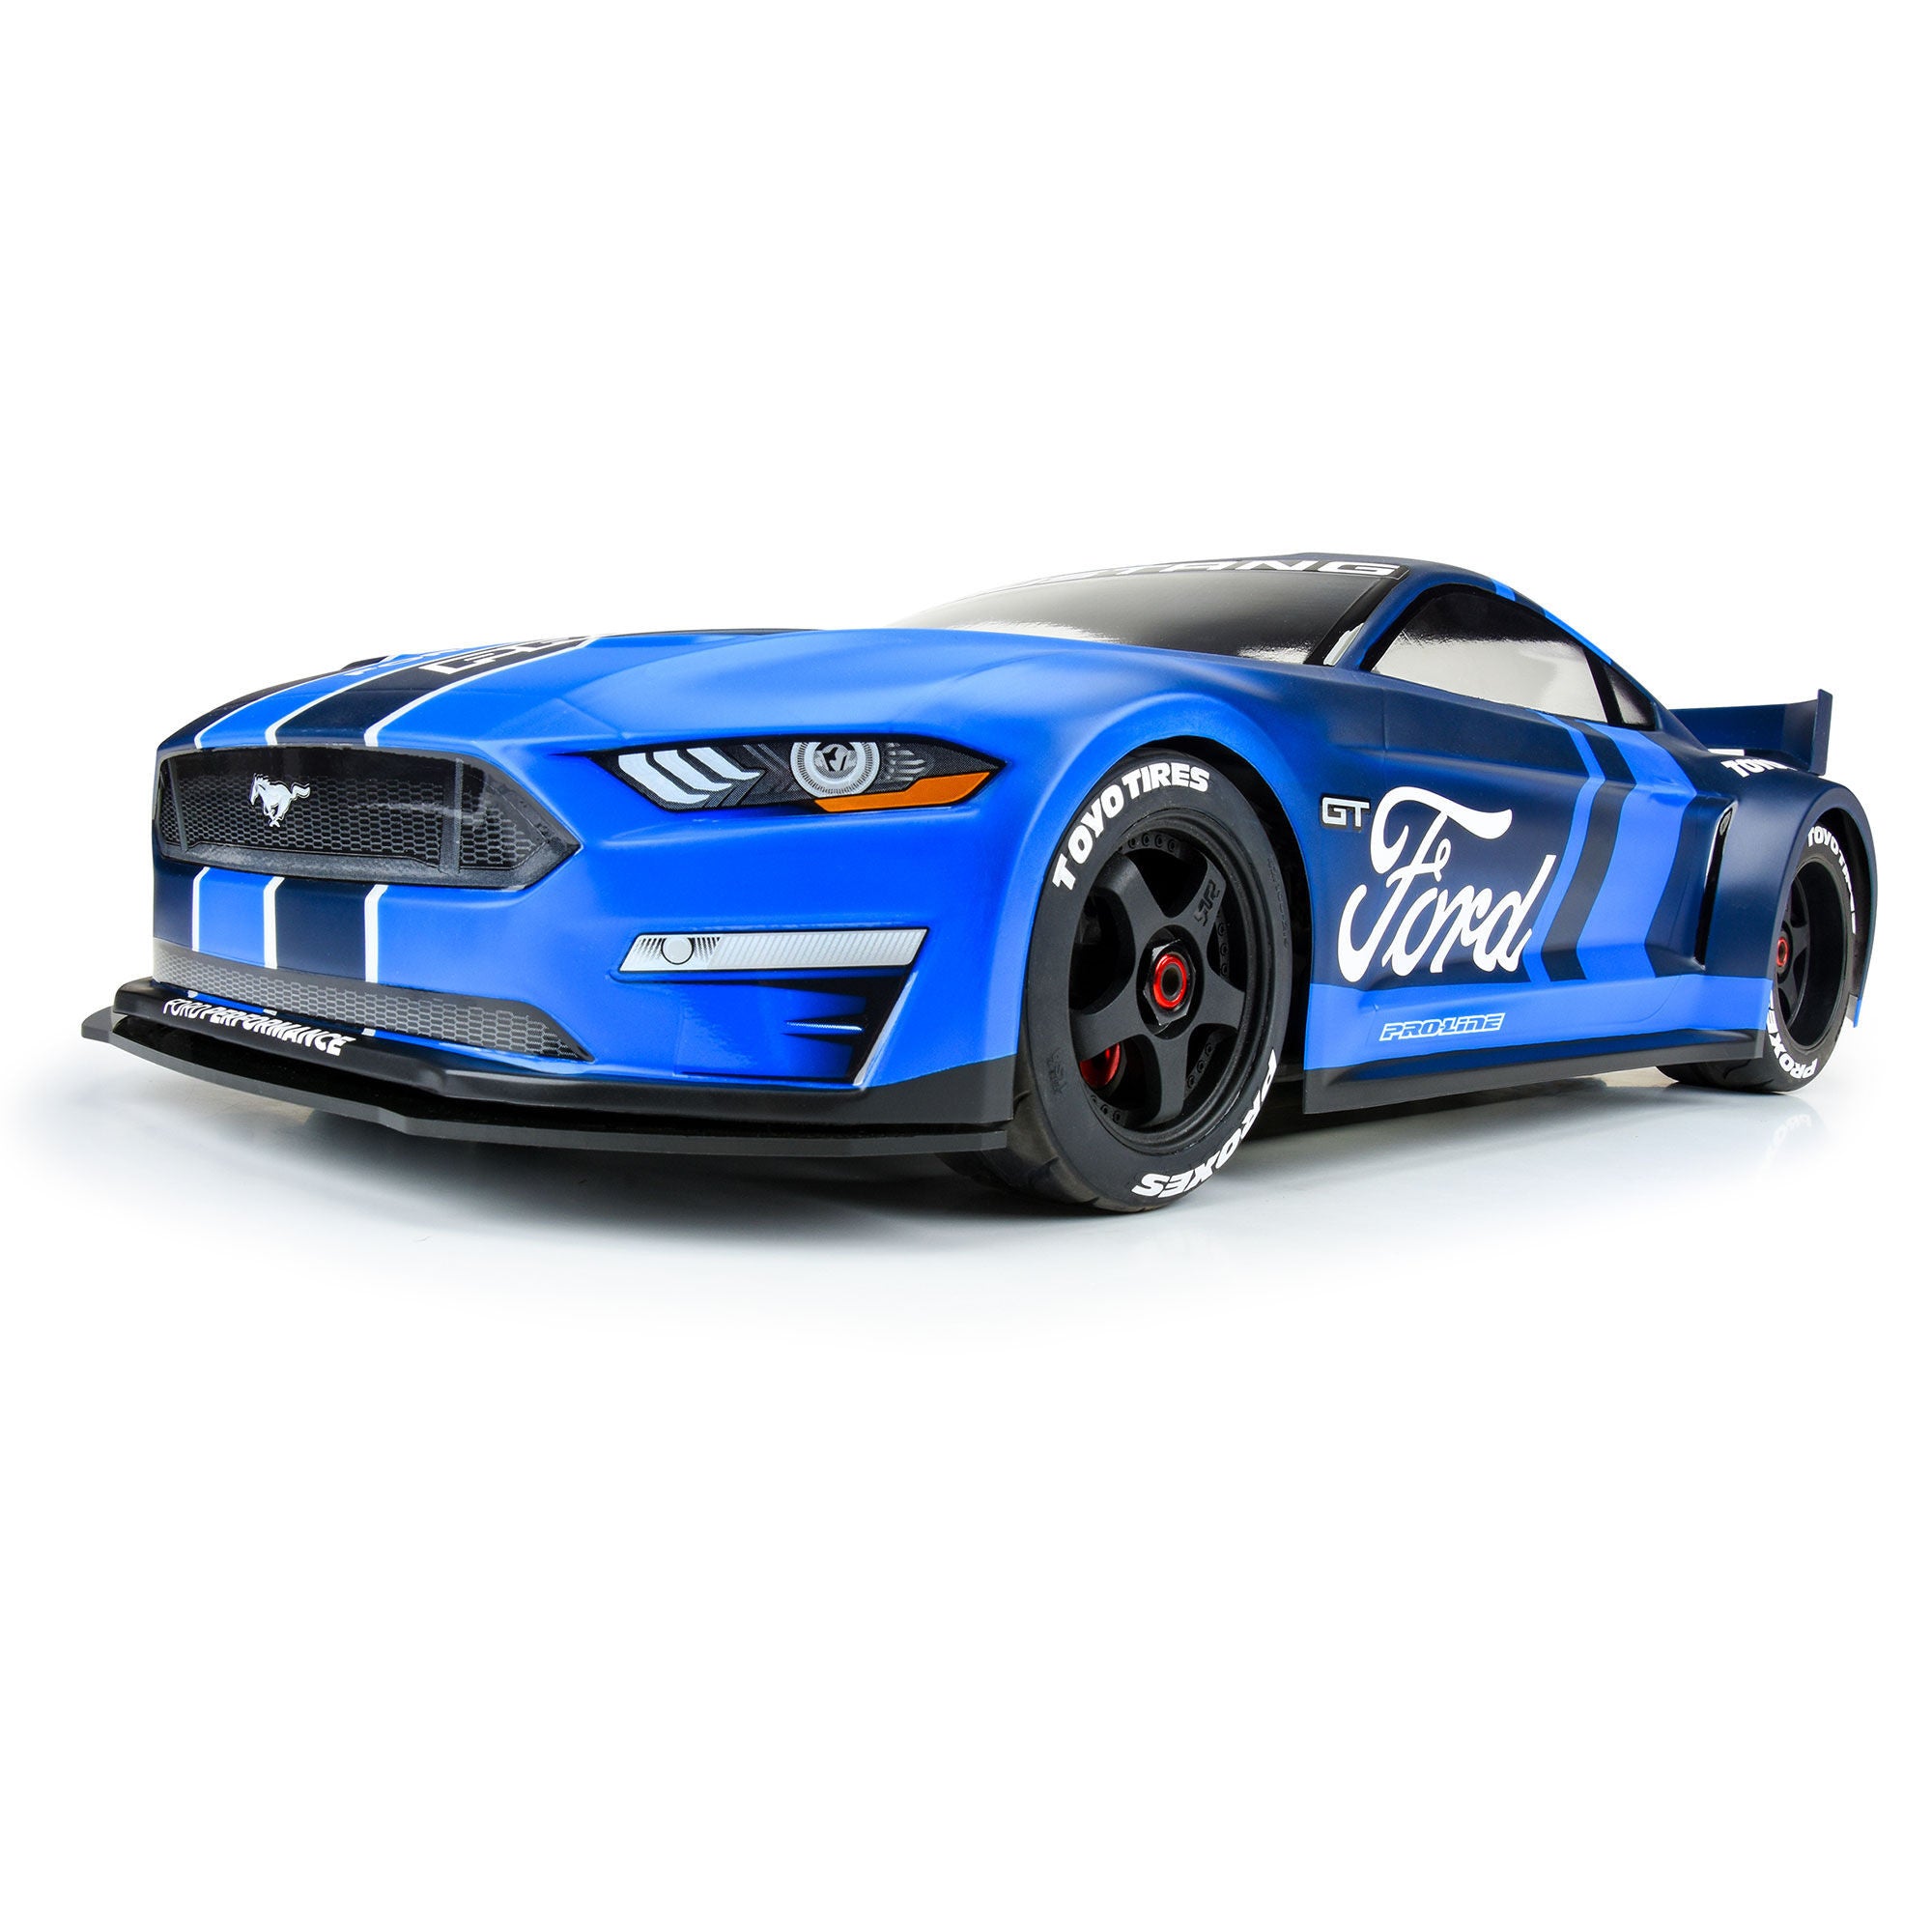 ProtoForm Carrosserie Ford Mustang GT Infraction PRM158100